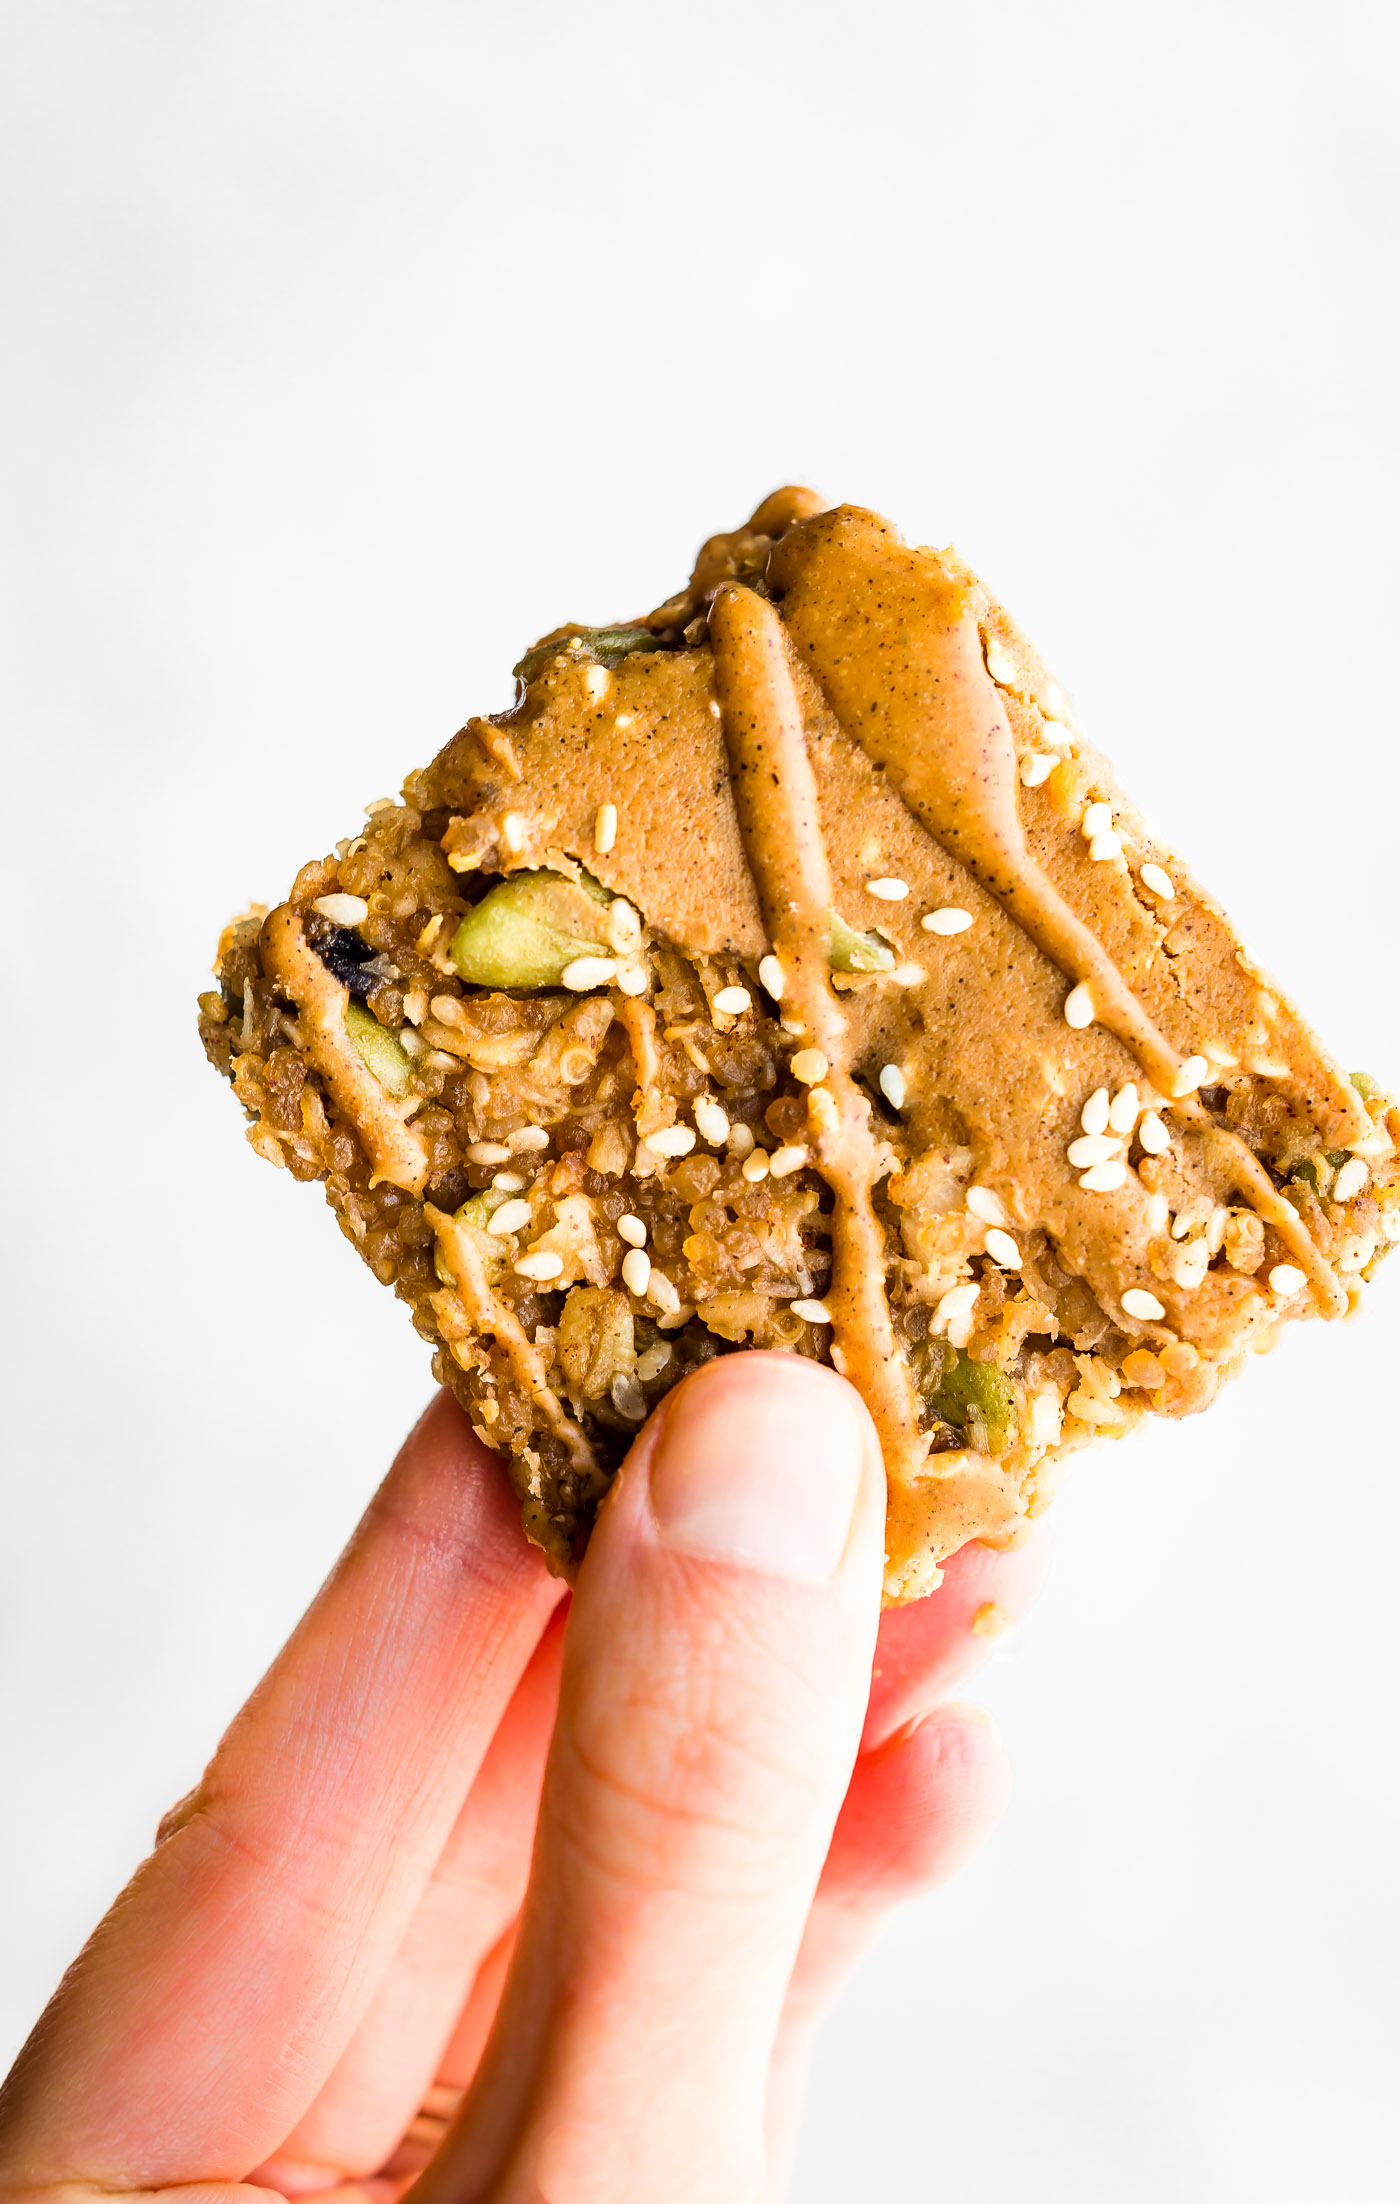 A single maple sesame quinoa bar drizzled with sunflower seed butter being held up against white background.